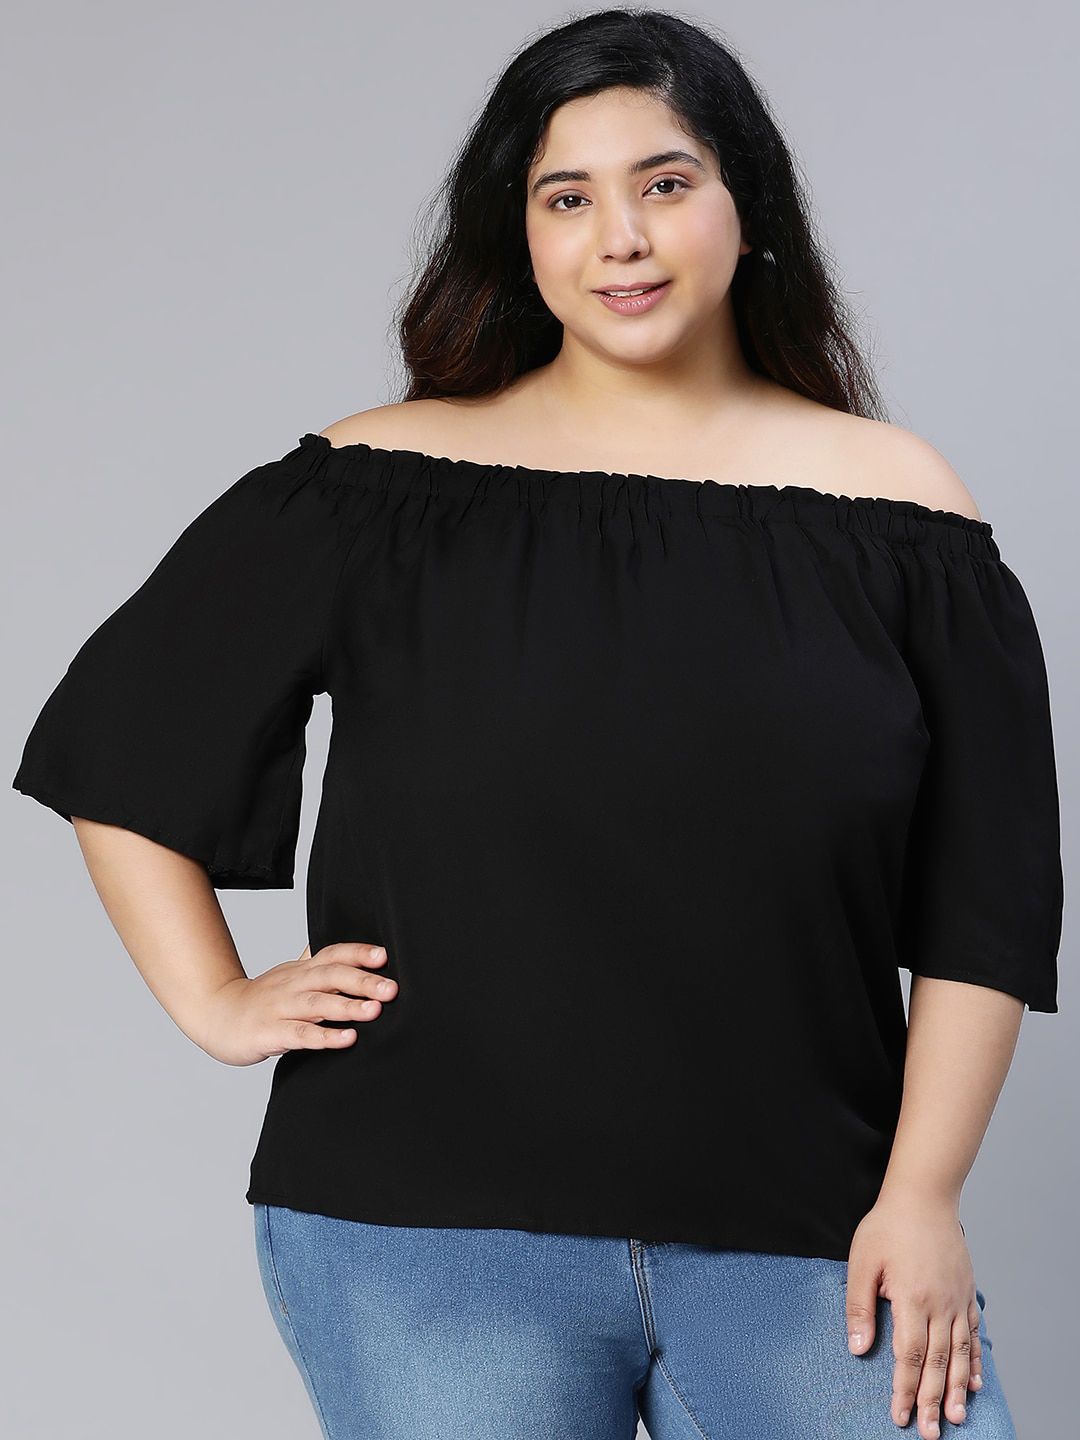 Oxolloxo Plus Size Off-Shoulder Bardot Top Price in India